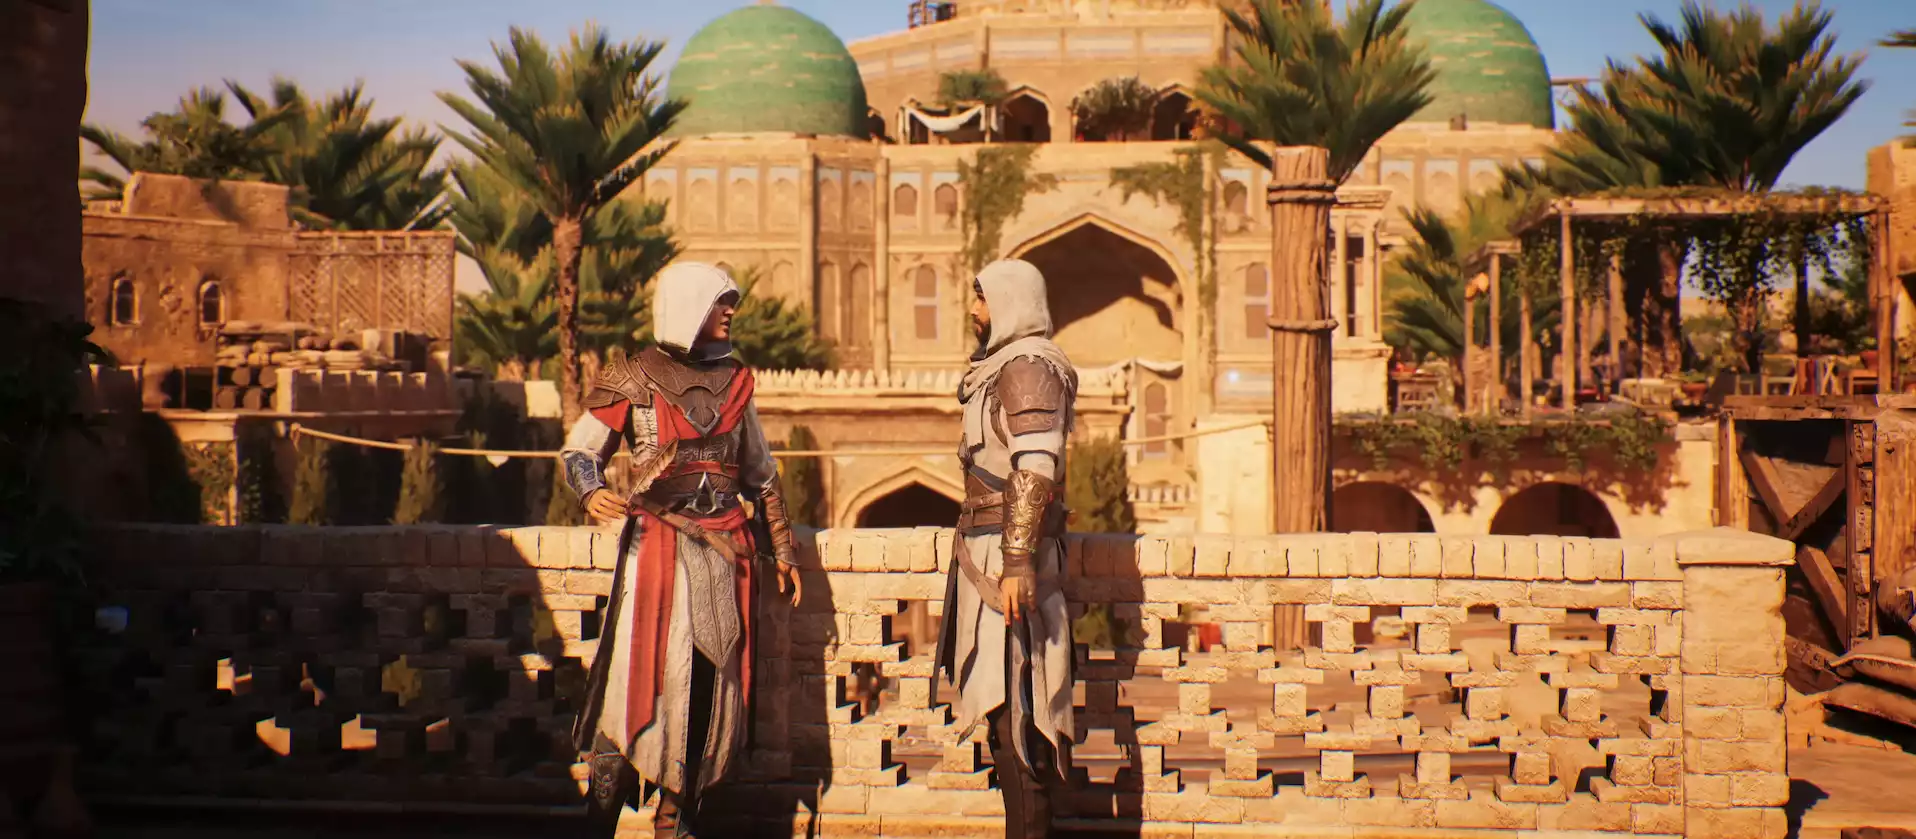 Assassin's Creed Mirage system requirements: Minimum & recommended specs for PC